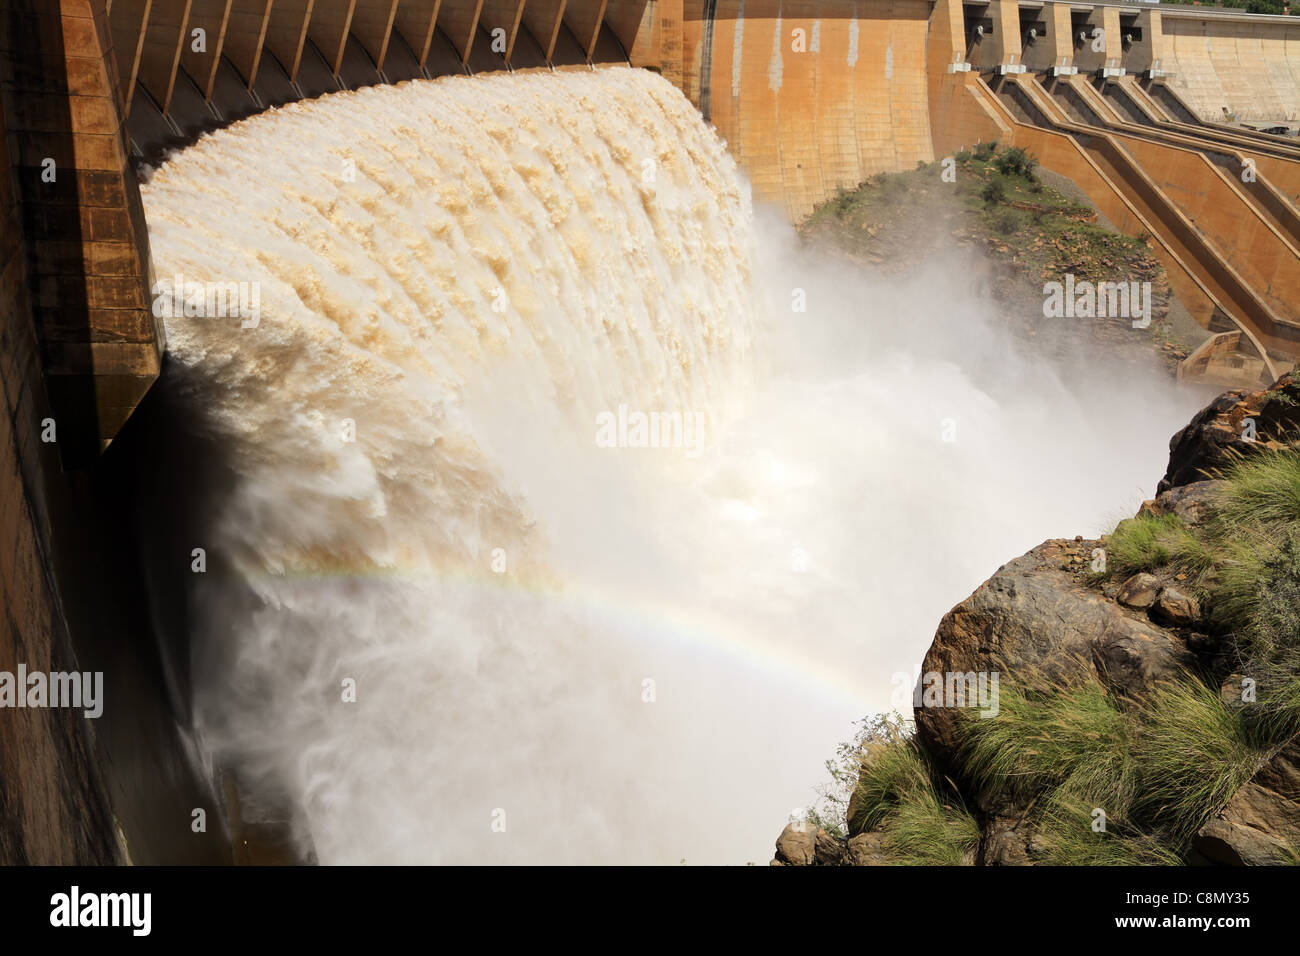 Strong flowing water released from the open sluice gates of a large dam Stock Photo